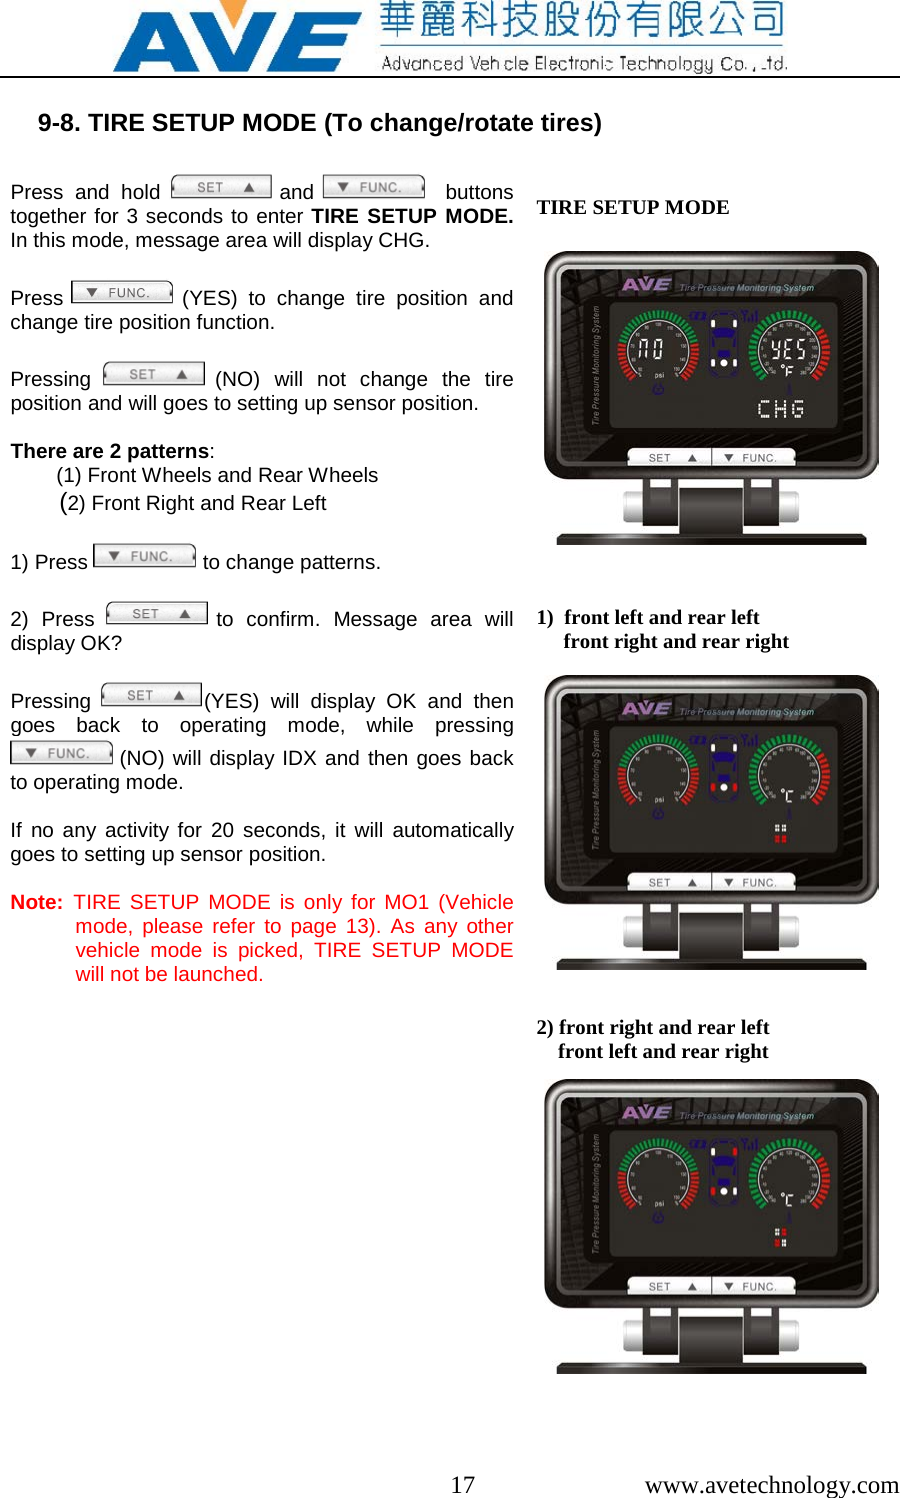  17  www.avetechnology.com  9-8. TIRE SETUP MODE (To change/rotate tires)  Press  and hold   and     buttons together for 3 seconds to enter TIRE SETUP MODE. In this mode, message area will display CHG.   Press   (YES) to change tire position and change tire position function.   Pressing  (NO) will not change the tire position and will goes to setting up sensor position.  There are 2 patterns:         (1) Front Wheels and Rear Wheels        (2) Front Right and Rear Left  1) Press   to change patterns.  2) Press   to confirm. Message area will display OK?   Pressing (YES) will display OK and then goes back to operating mode, while pressing  (NO) will display IDX and then goes back to operating mode.  If no any activity for 20 seconds, it will automatically goes to setting up sensor position.  Note:  TIRE SETUP MODE is only for MO1 (Vehicle mode, please refer to page 13).  As any other vehicle mode is picked, TIRE SETUP MODE will not be launched.  TIRE SETUP MODE                 1)  front left and rear left      front right and rear right                2) front right and rear left     front left and rear right             